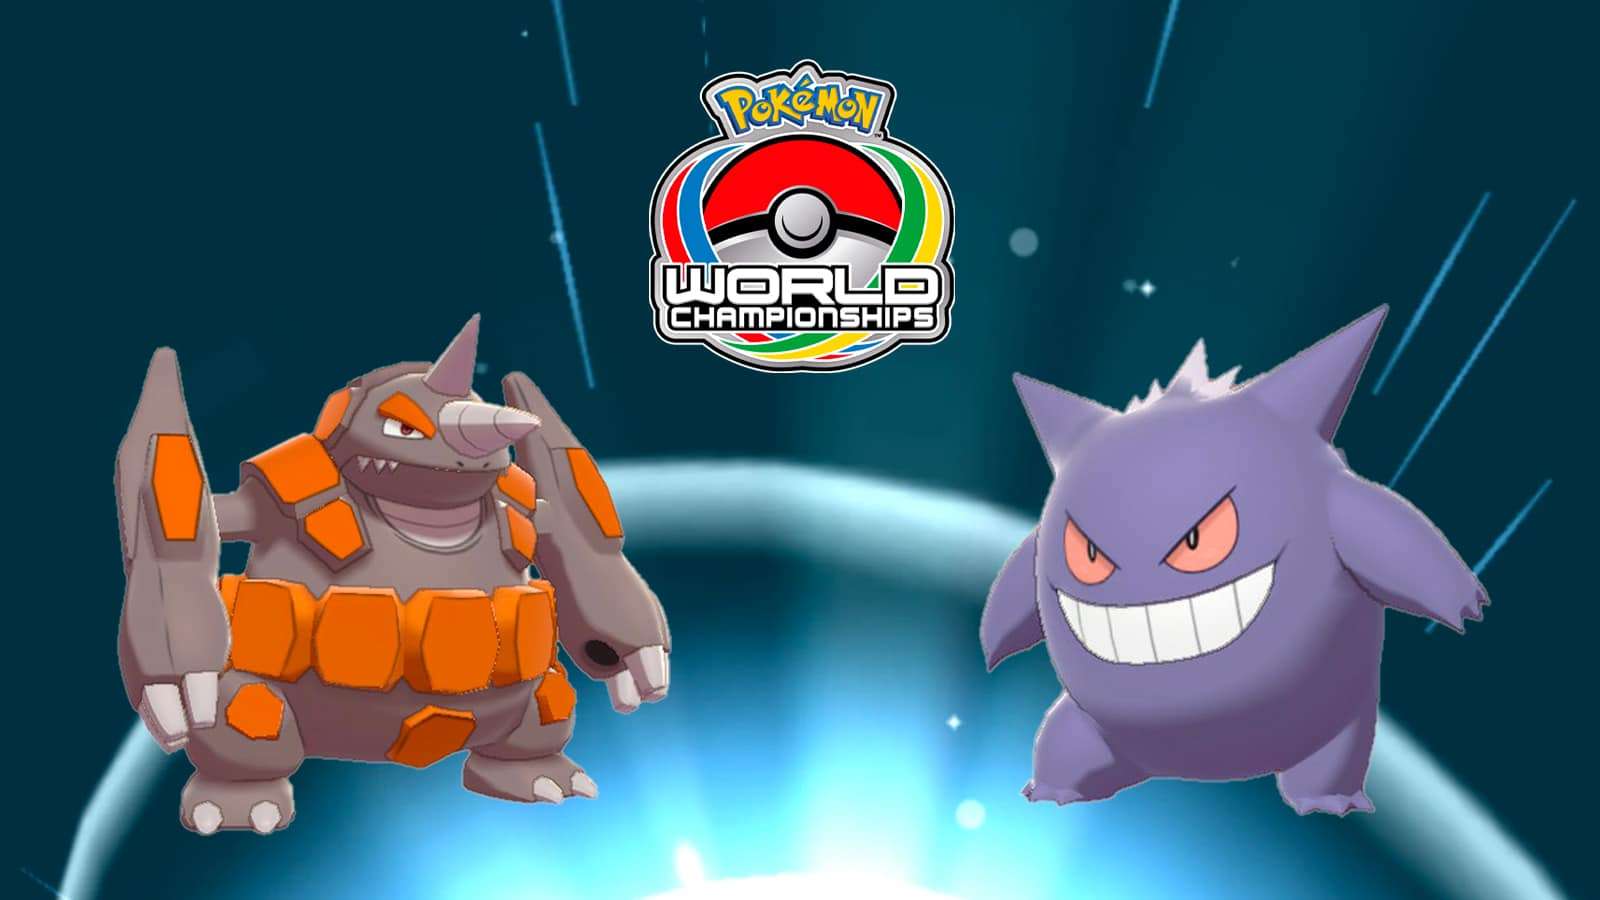 Gengar learning exclusive moves during Pokemon Go World Championships event